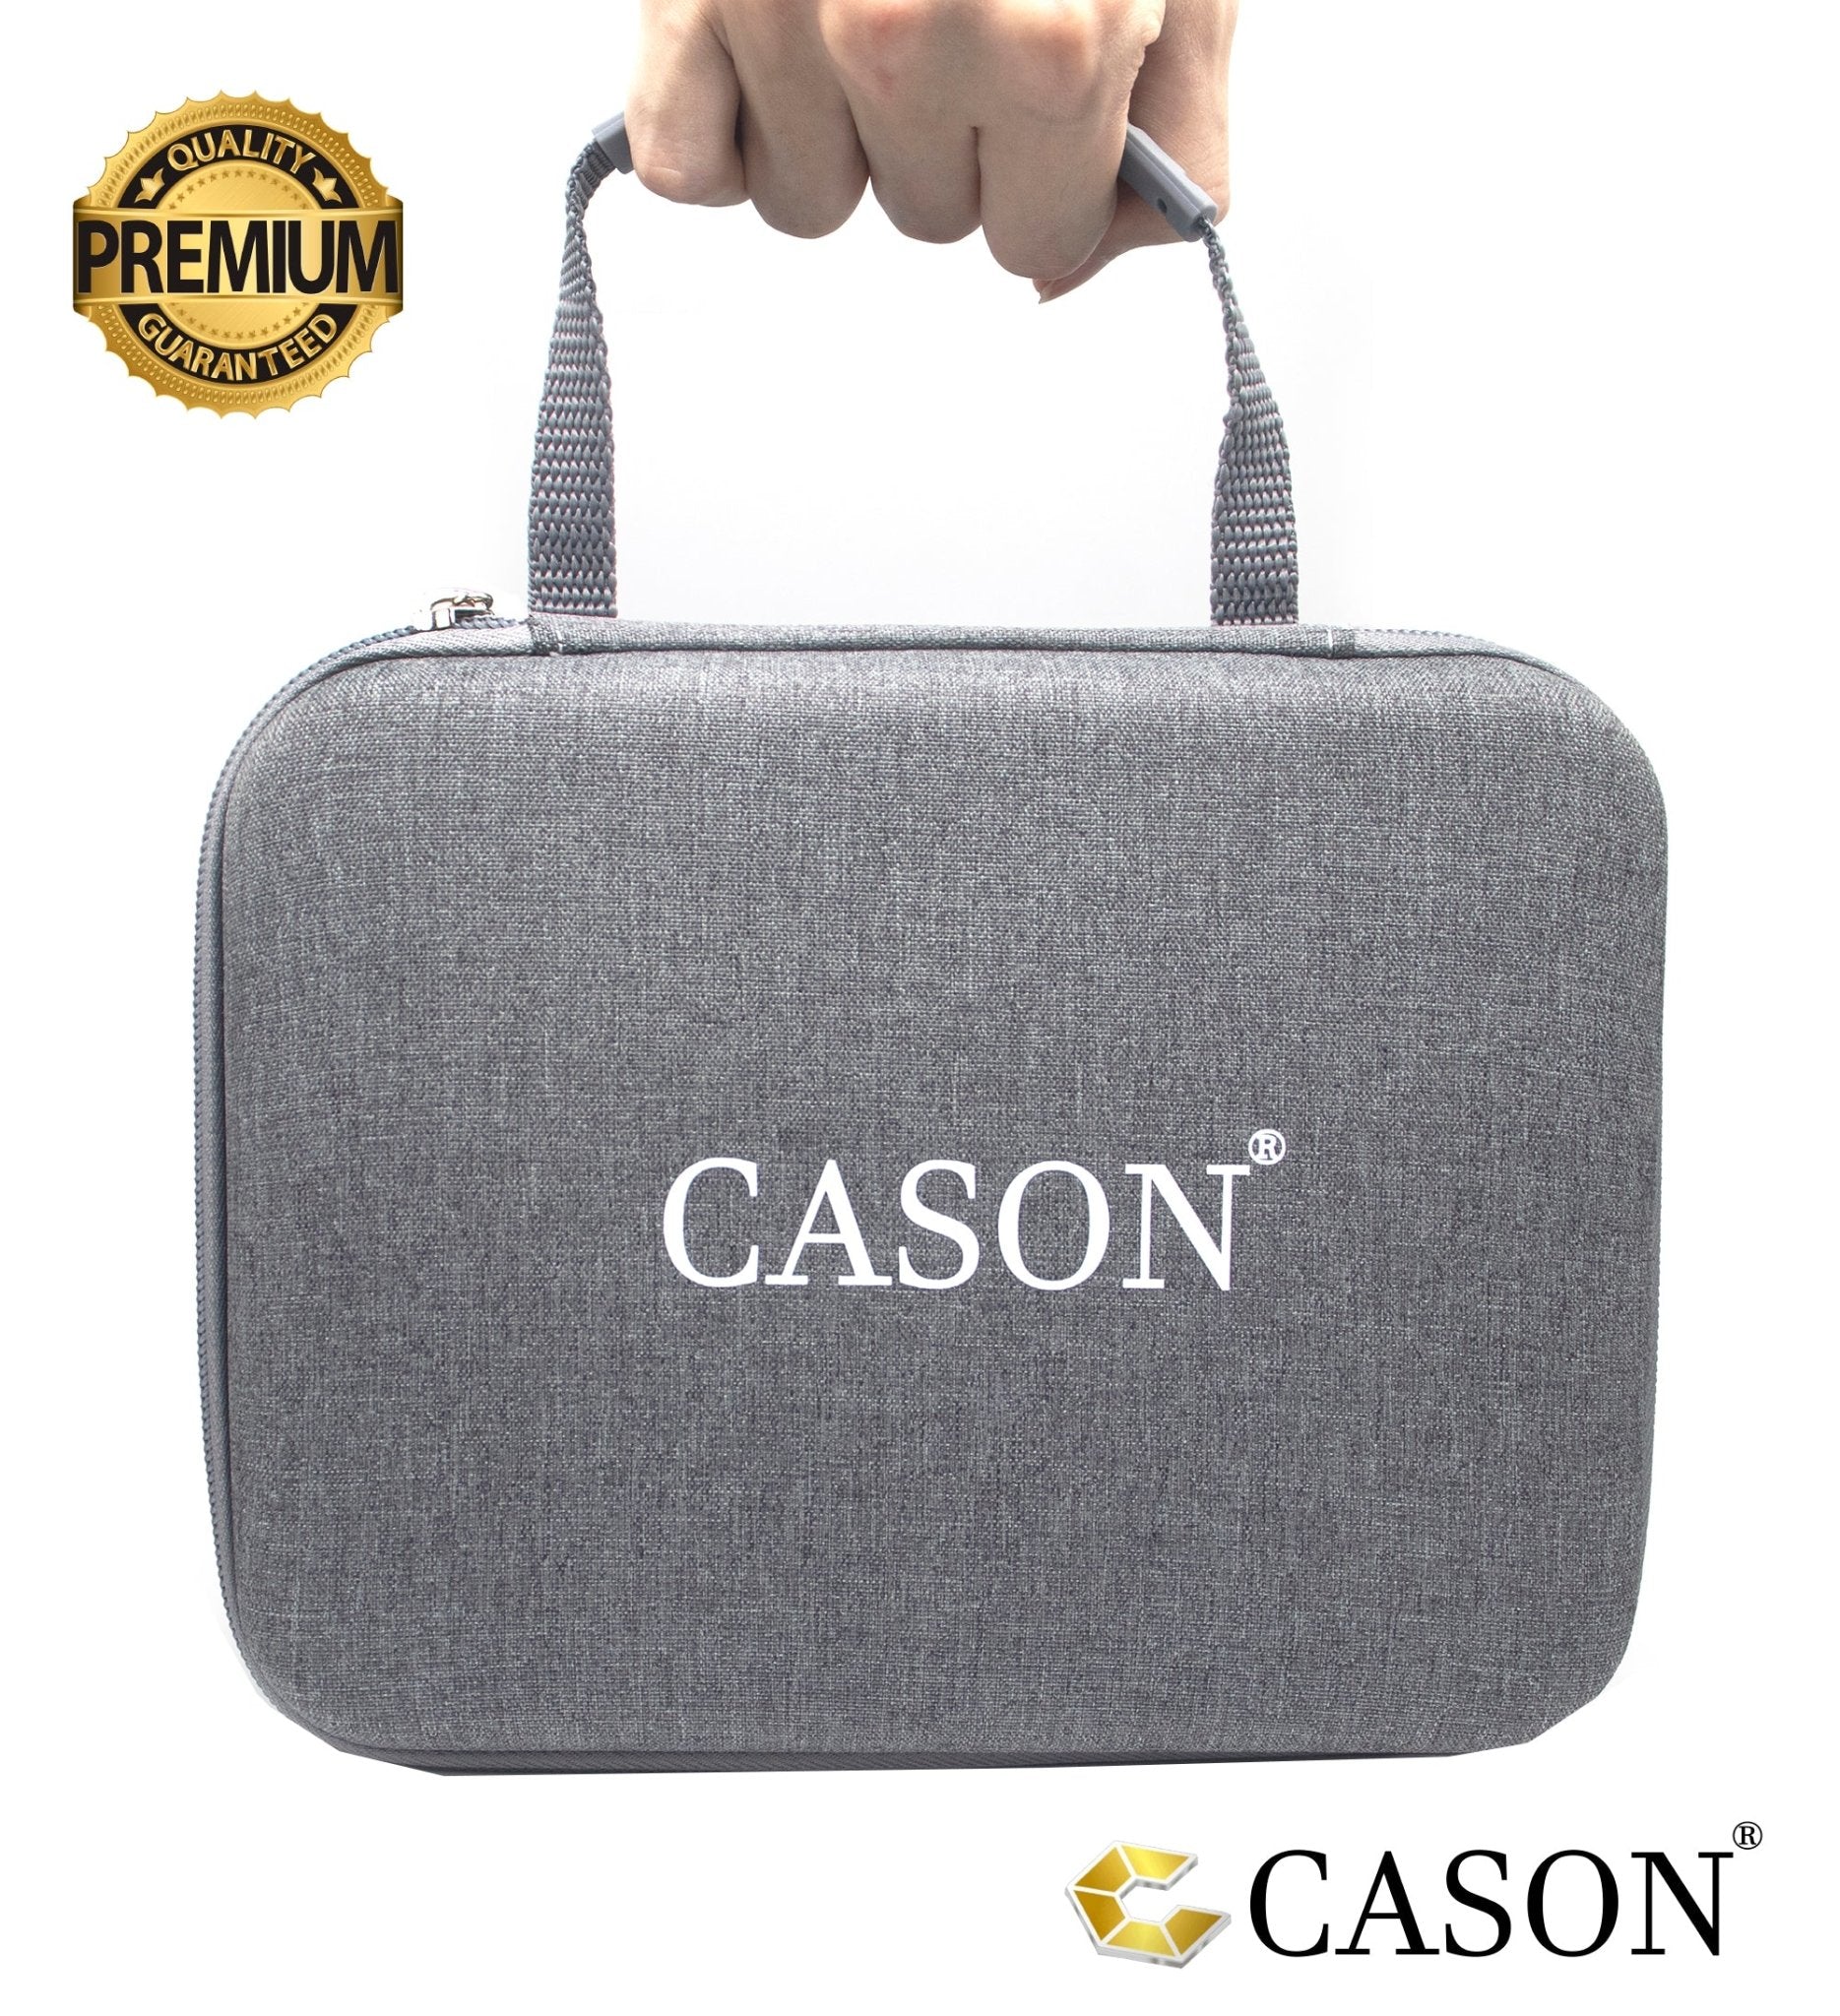 -Carrying Case for Action Bag Accessories cason.in